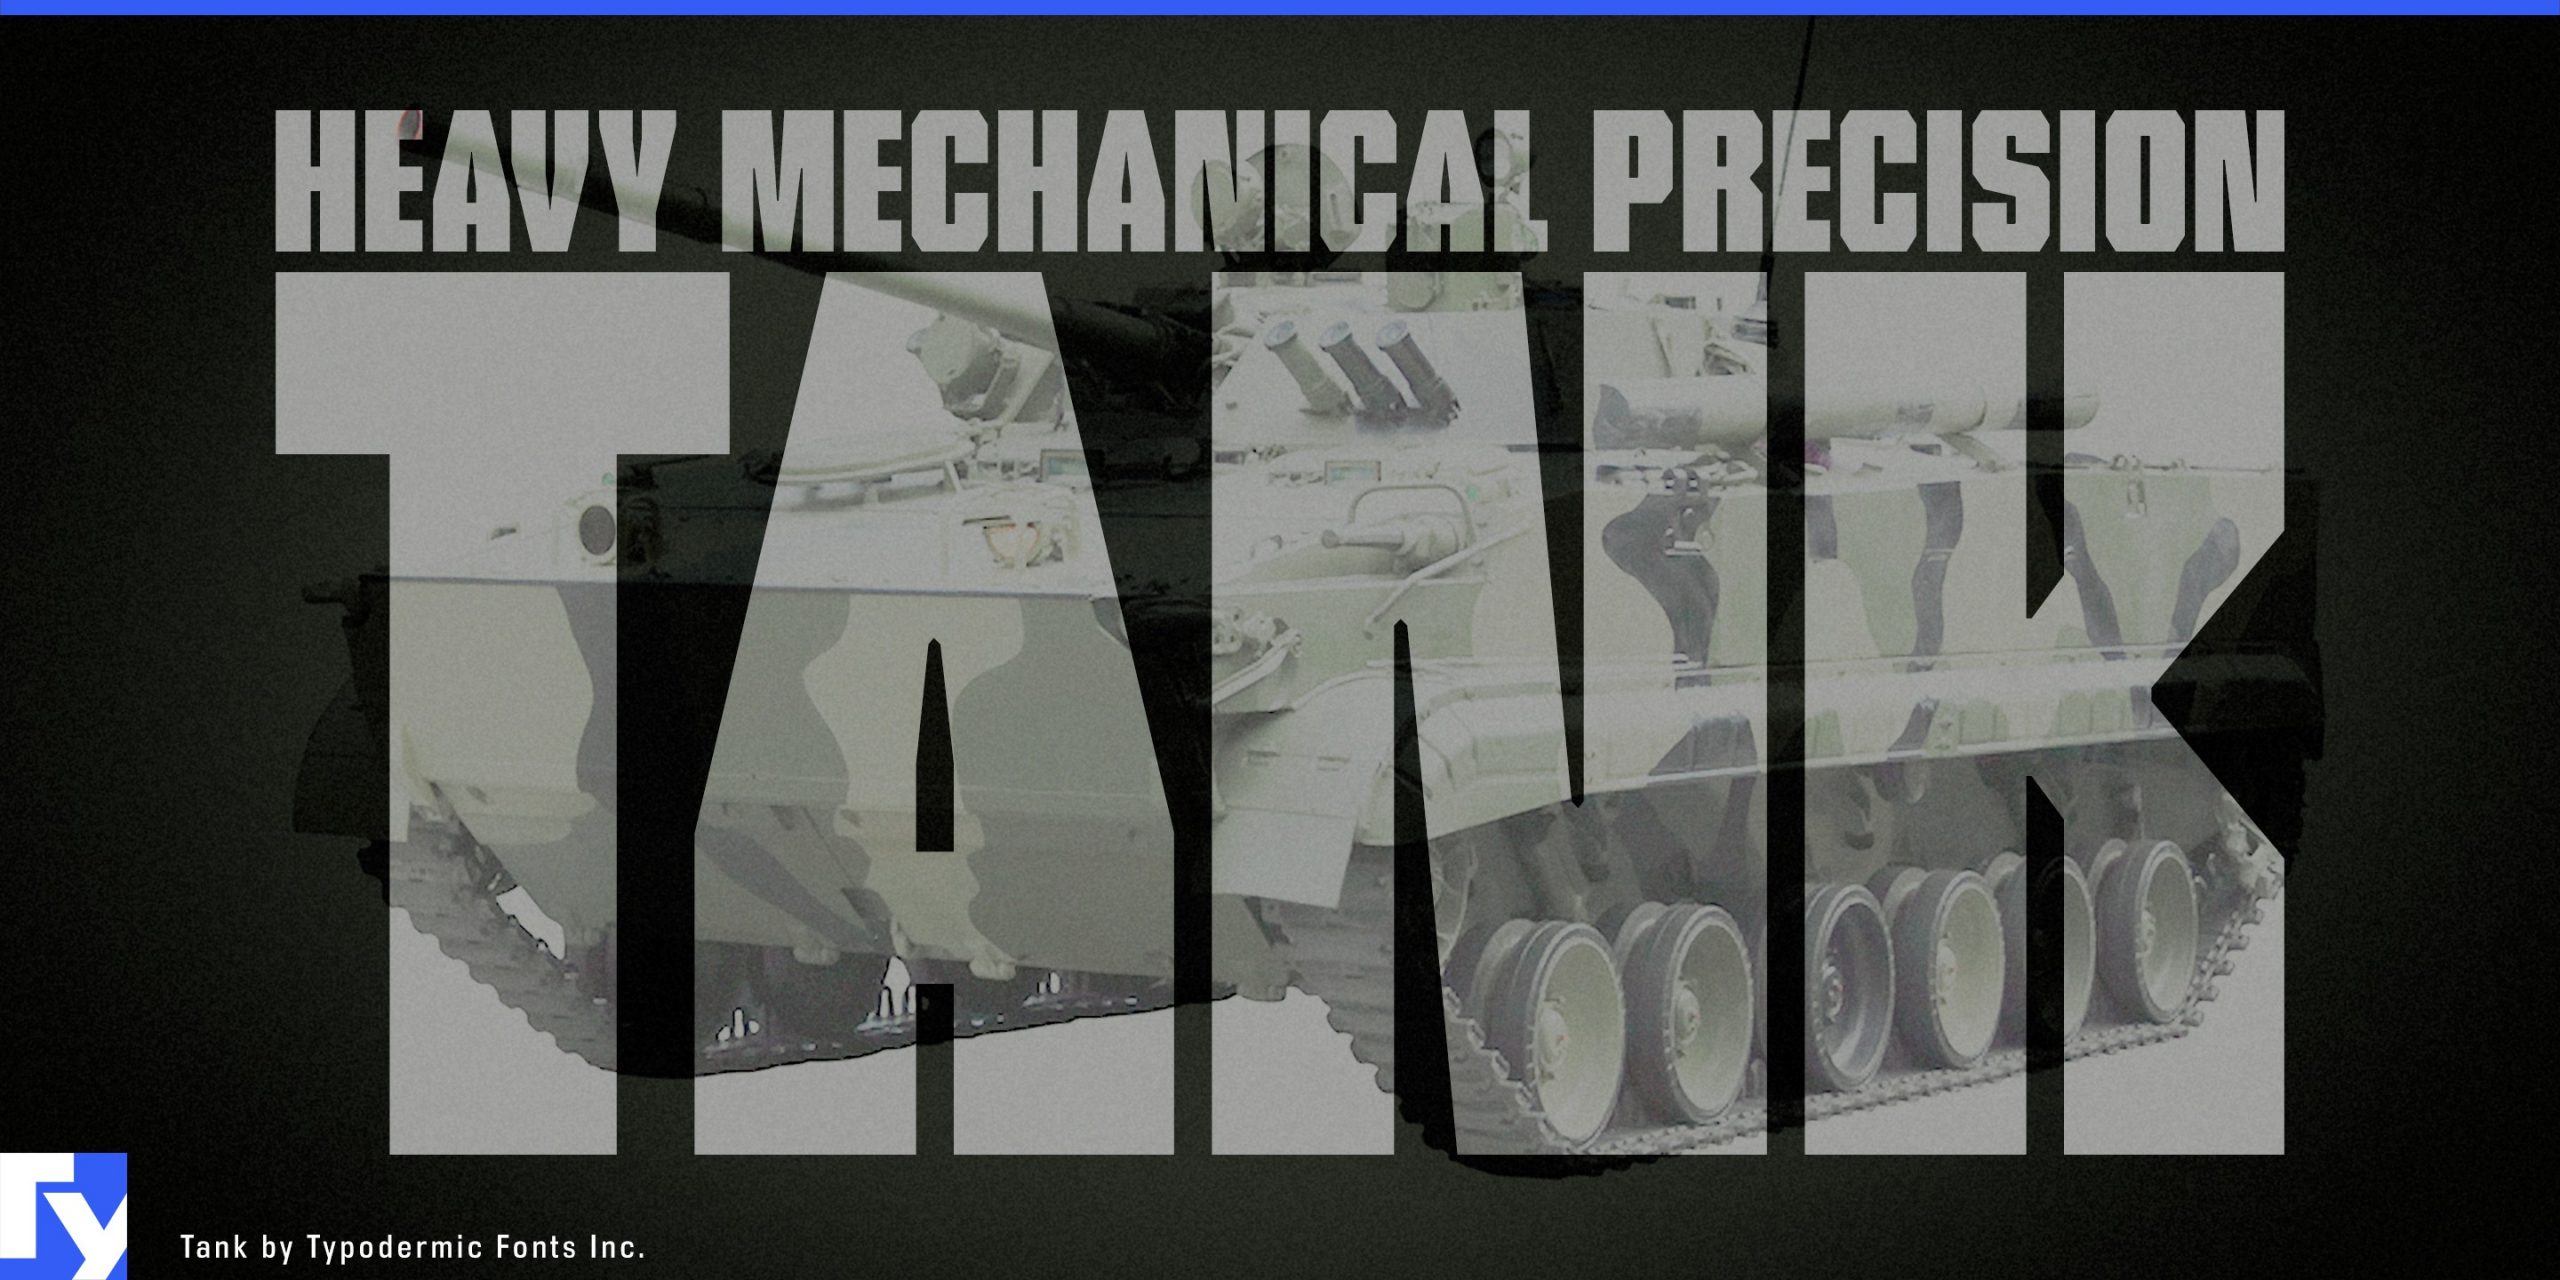 Experience the robust precision of Tank's letterforms in action.